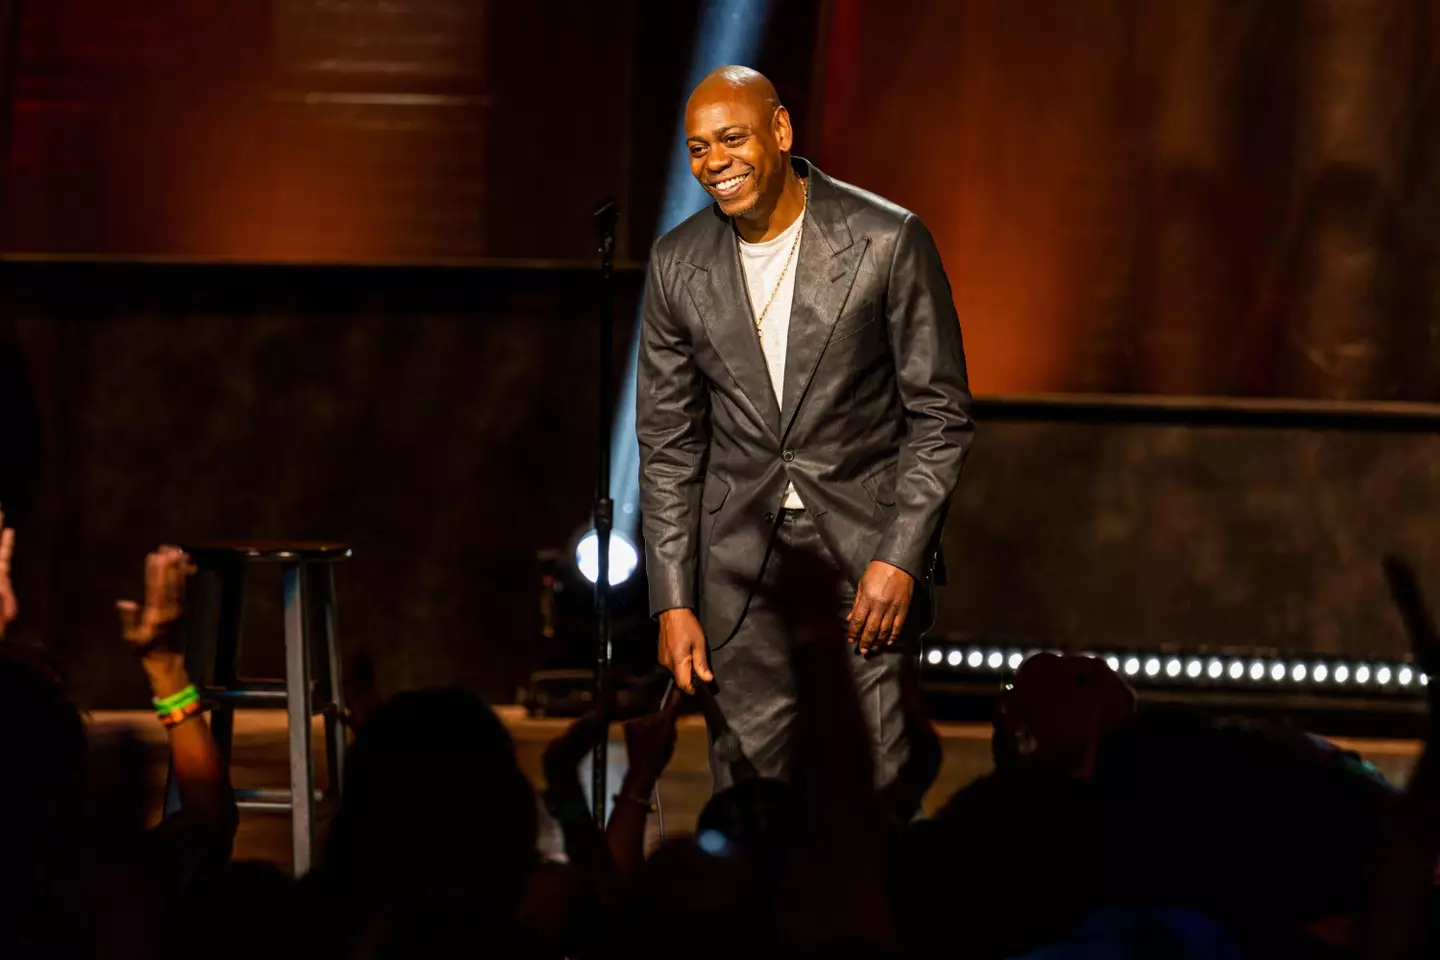 Dave Chappelle was accused of being transphobic in his Netflix show, The Closer.